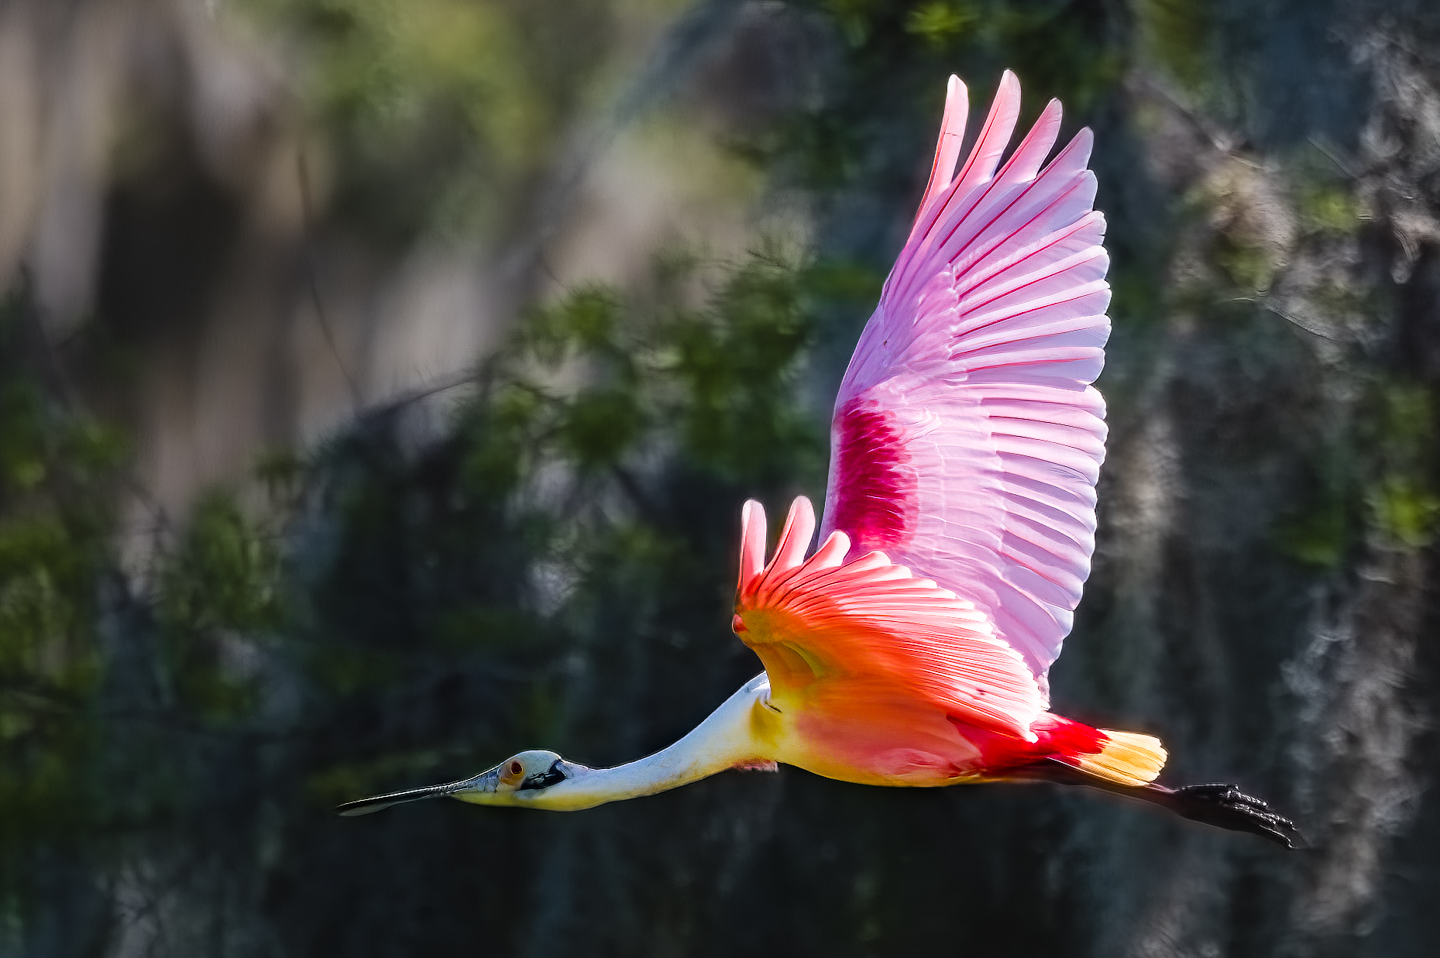 1st PrizeOpen Color In Class 2 By Michael Claudy For Roseate Spoonbill Exiting Left NOV-2022.jpg